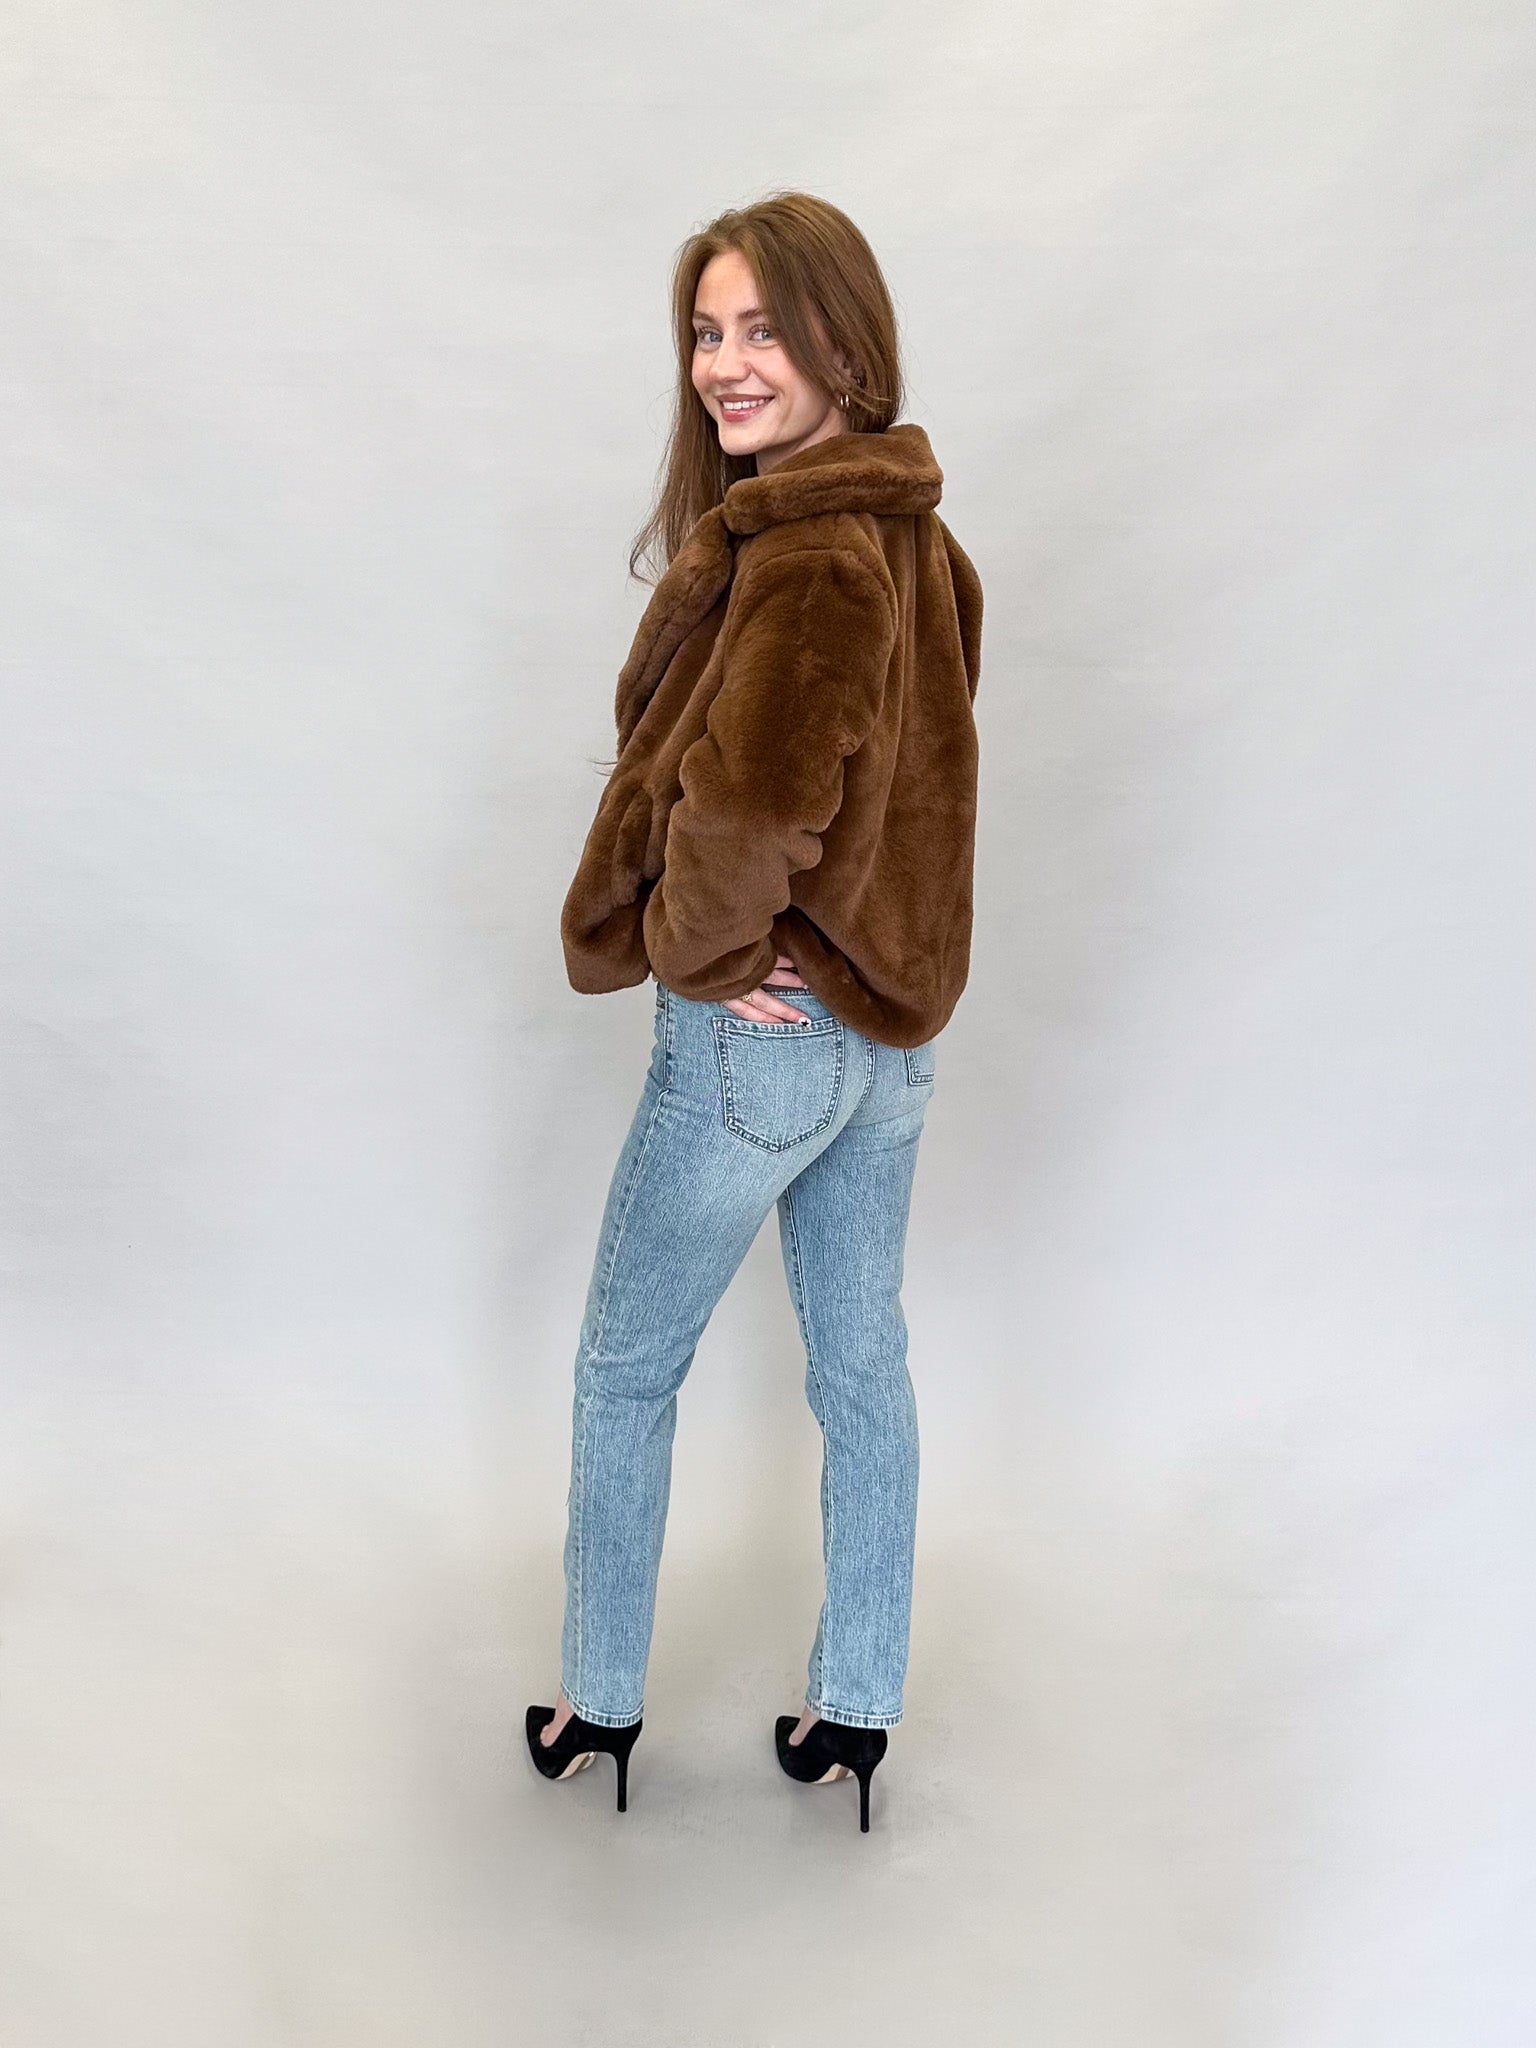 Name On The Throne Faux Fur Jacket